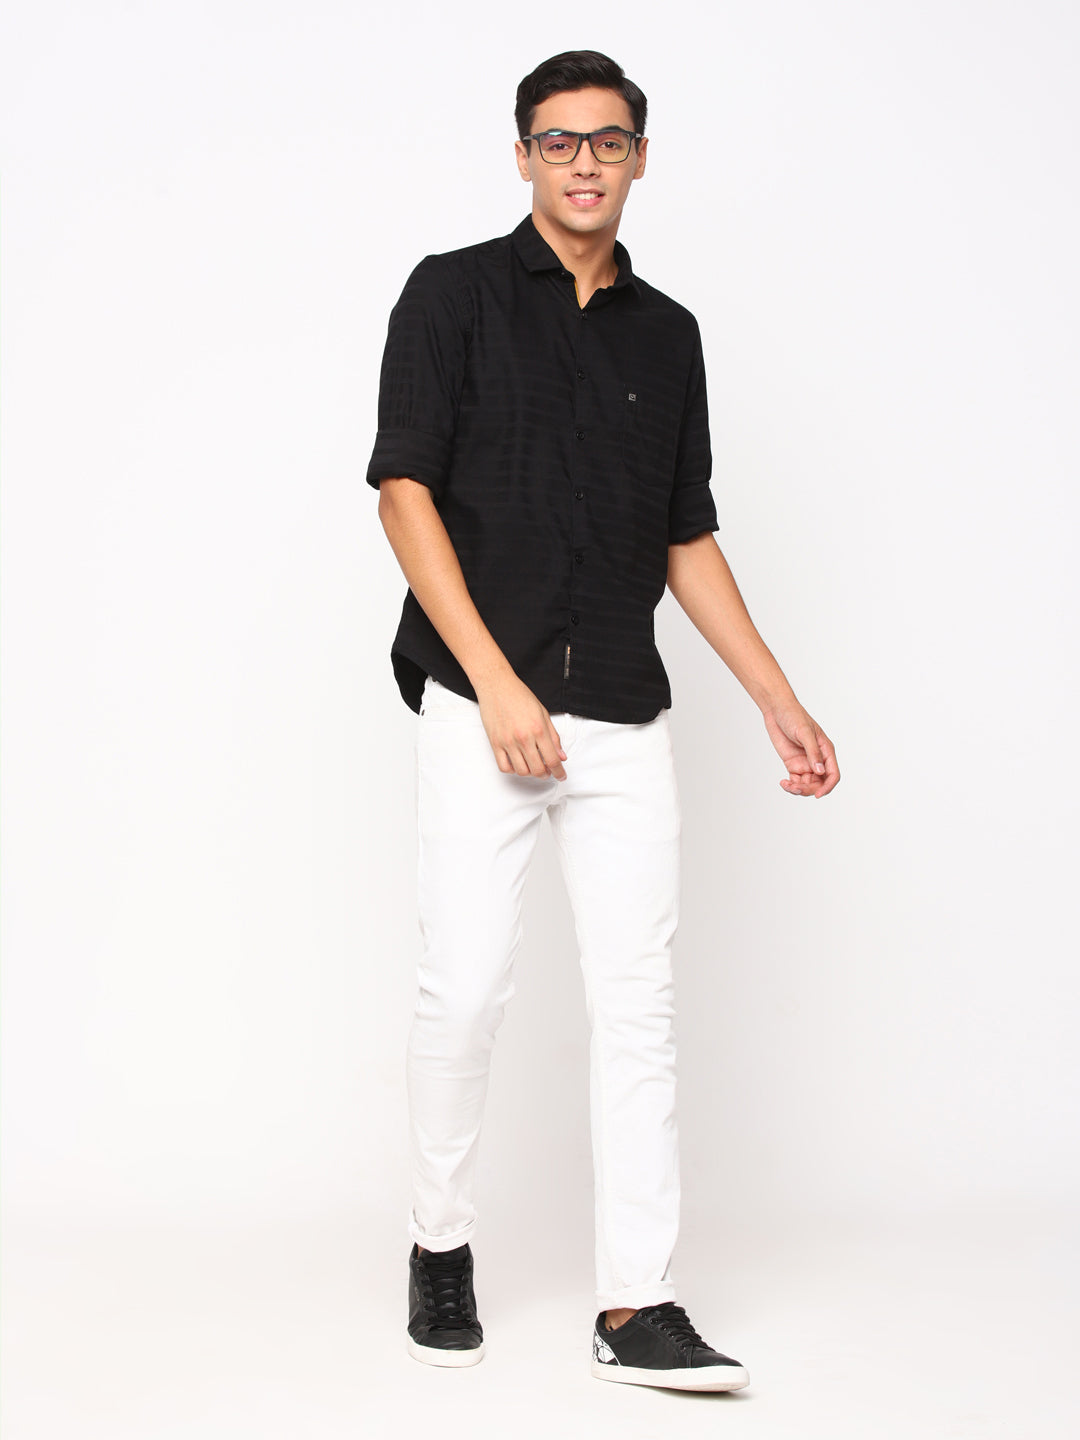 9+ Impressive Black Shirt With White Shoes Outfit Ideas